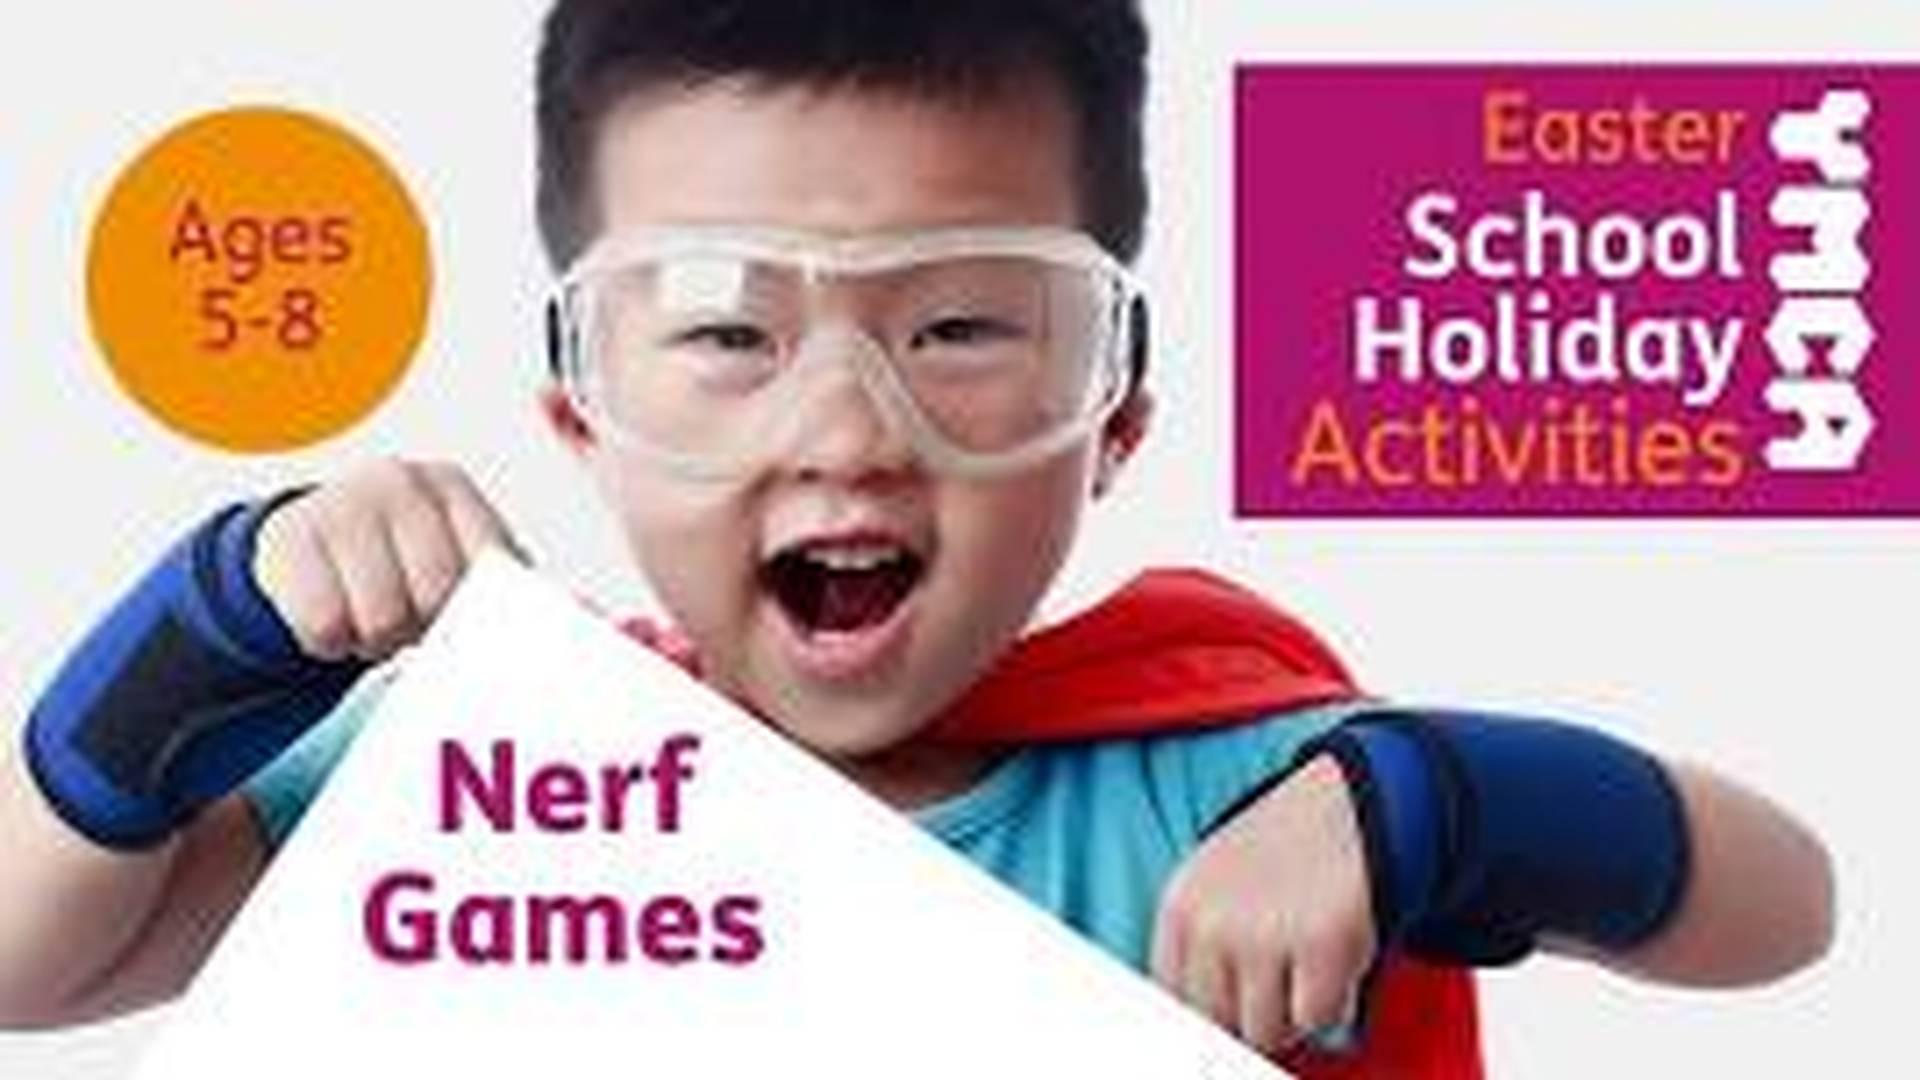 Nerf Games - Ages 5-8 photo